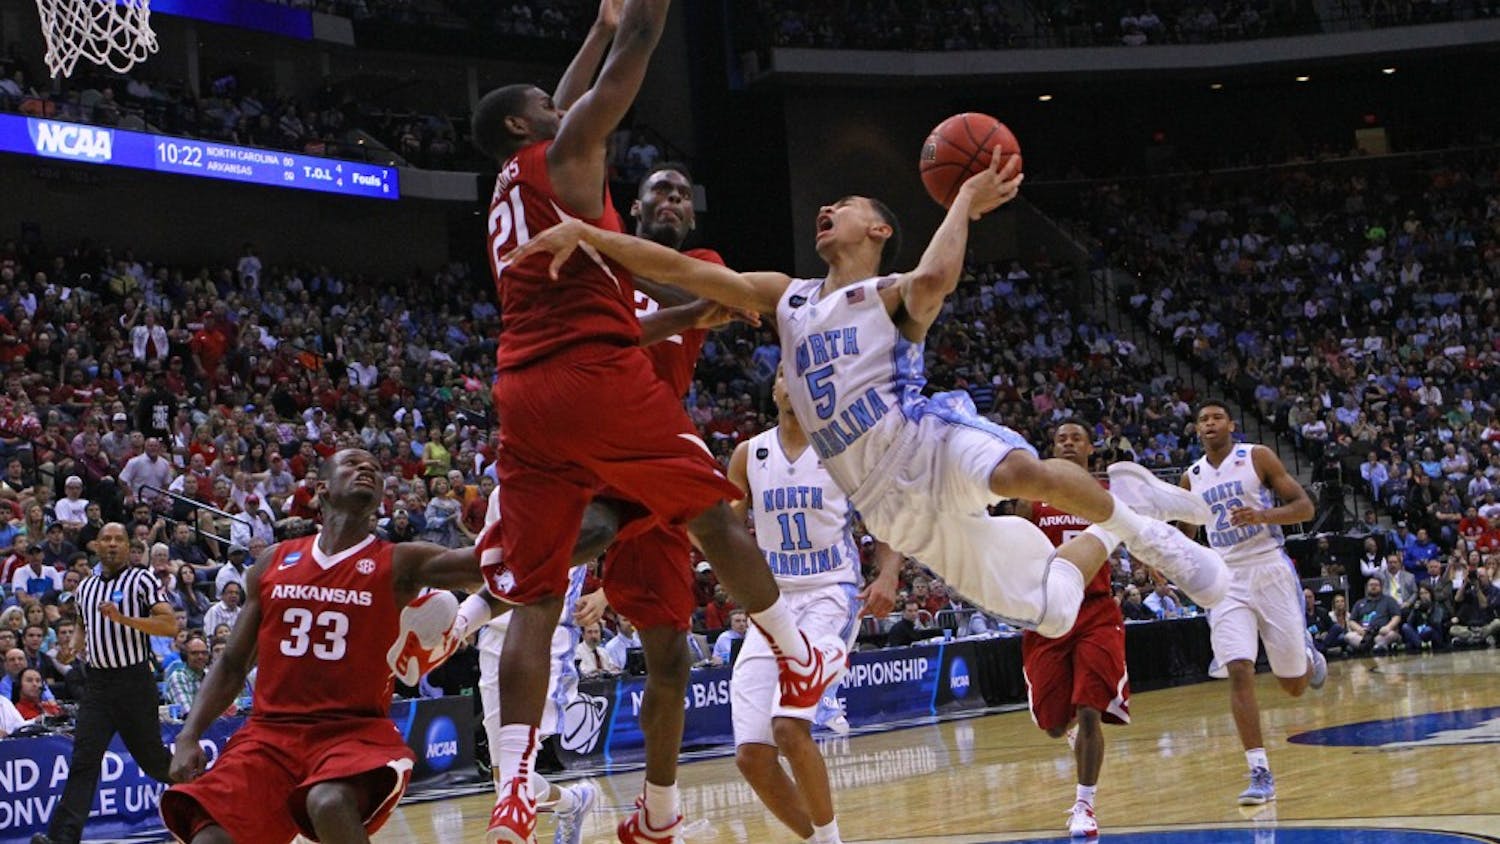 UNC guard Marcus Paige (5) goes up for a layup.  The Tar Heels defeated the Arkansas Razorbacks, 87-78, on Saturday in Jacksonville, Fla.